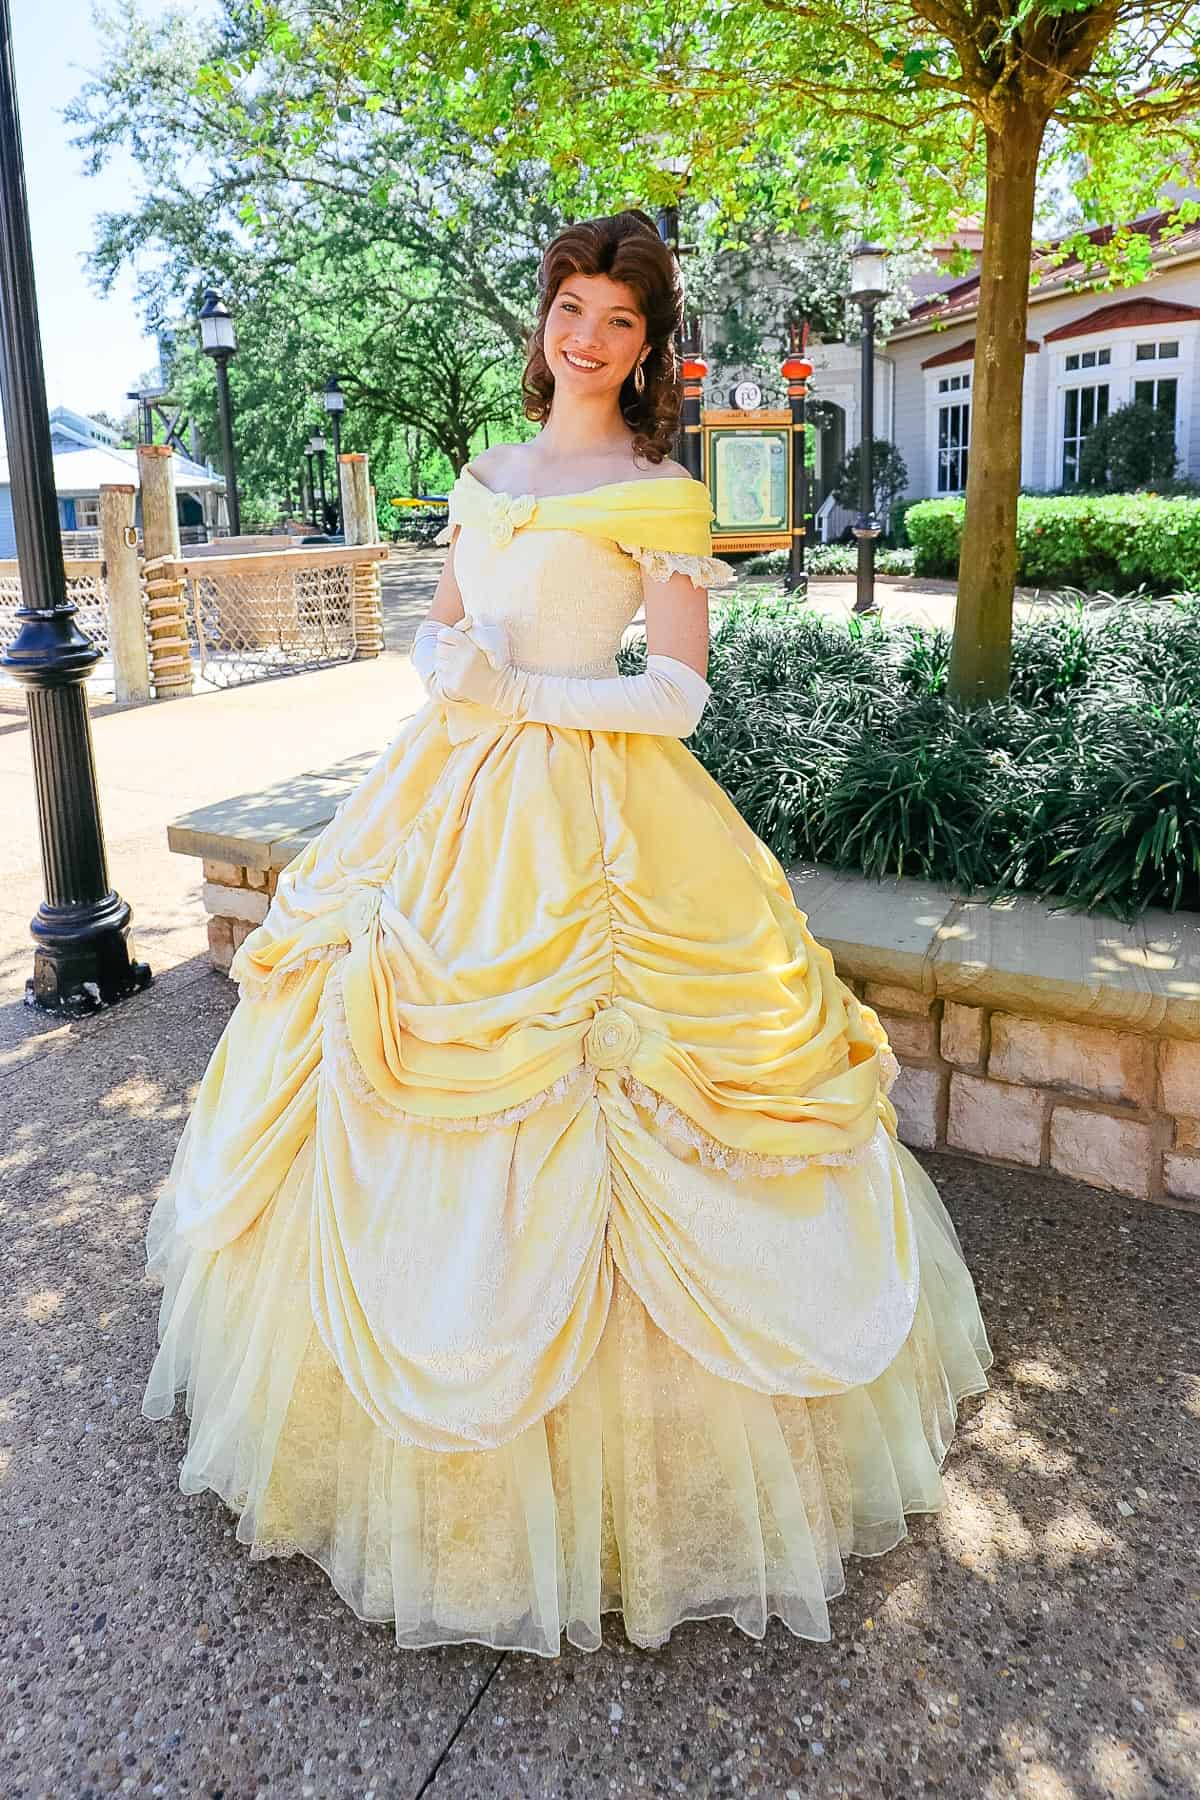 Belle wearing her yellow ball gown at a rare character sighting at Port Orleans Riverside. 